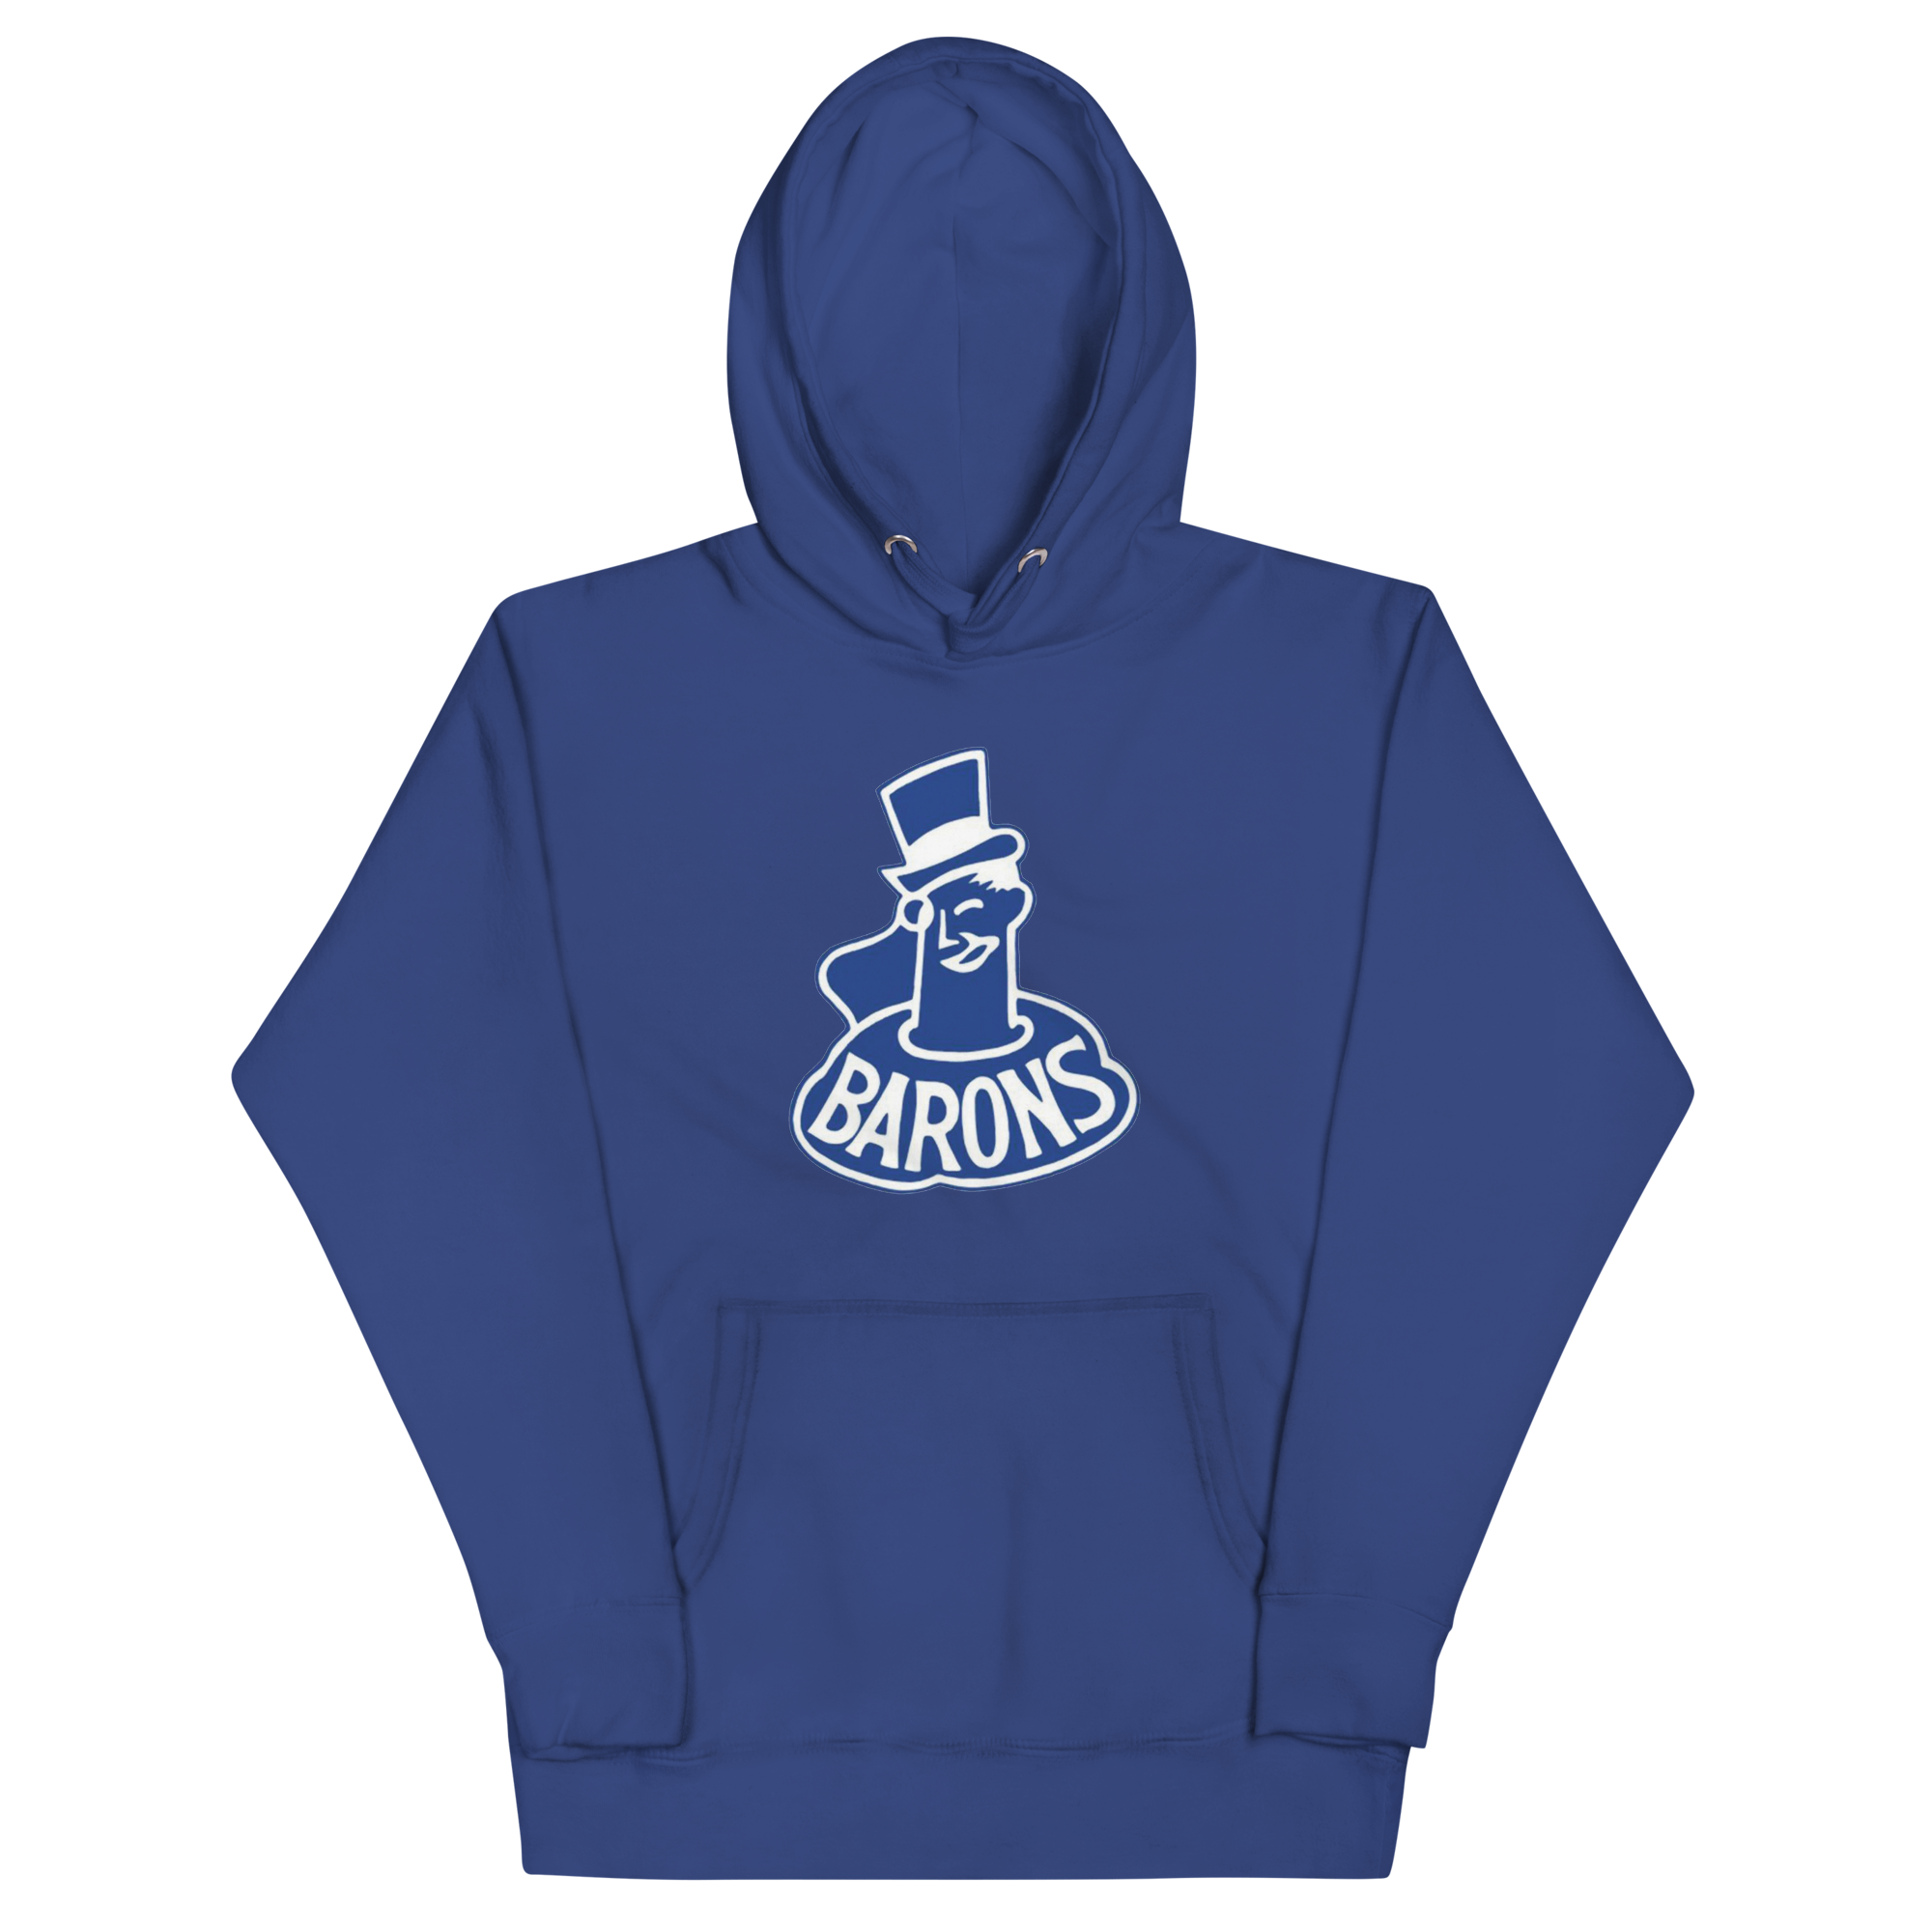 Blue Cleveland Barons hoodie